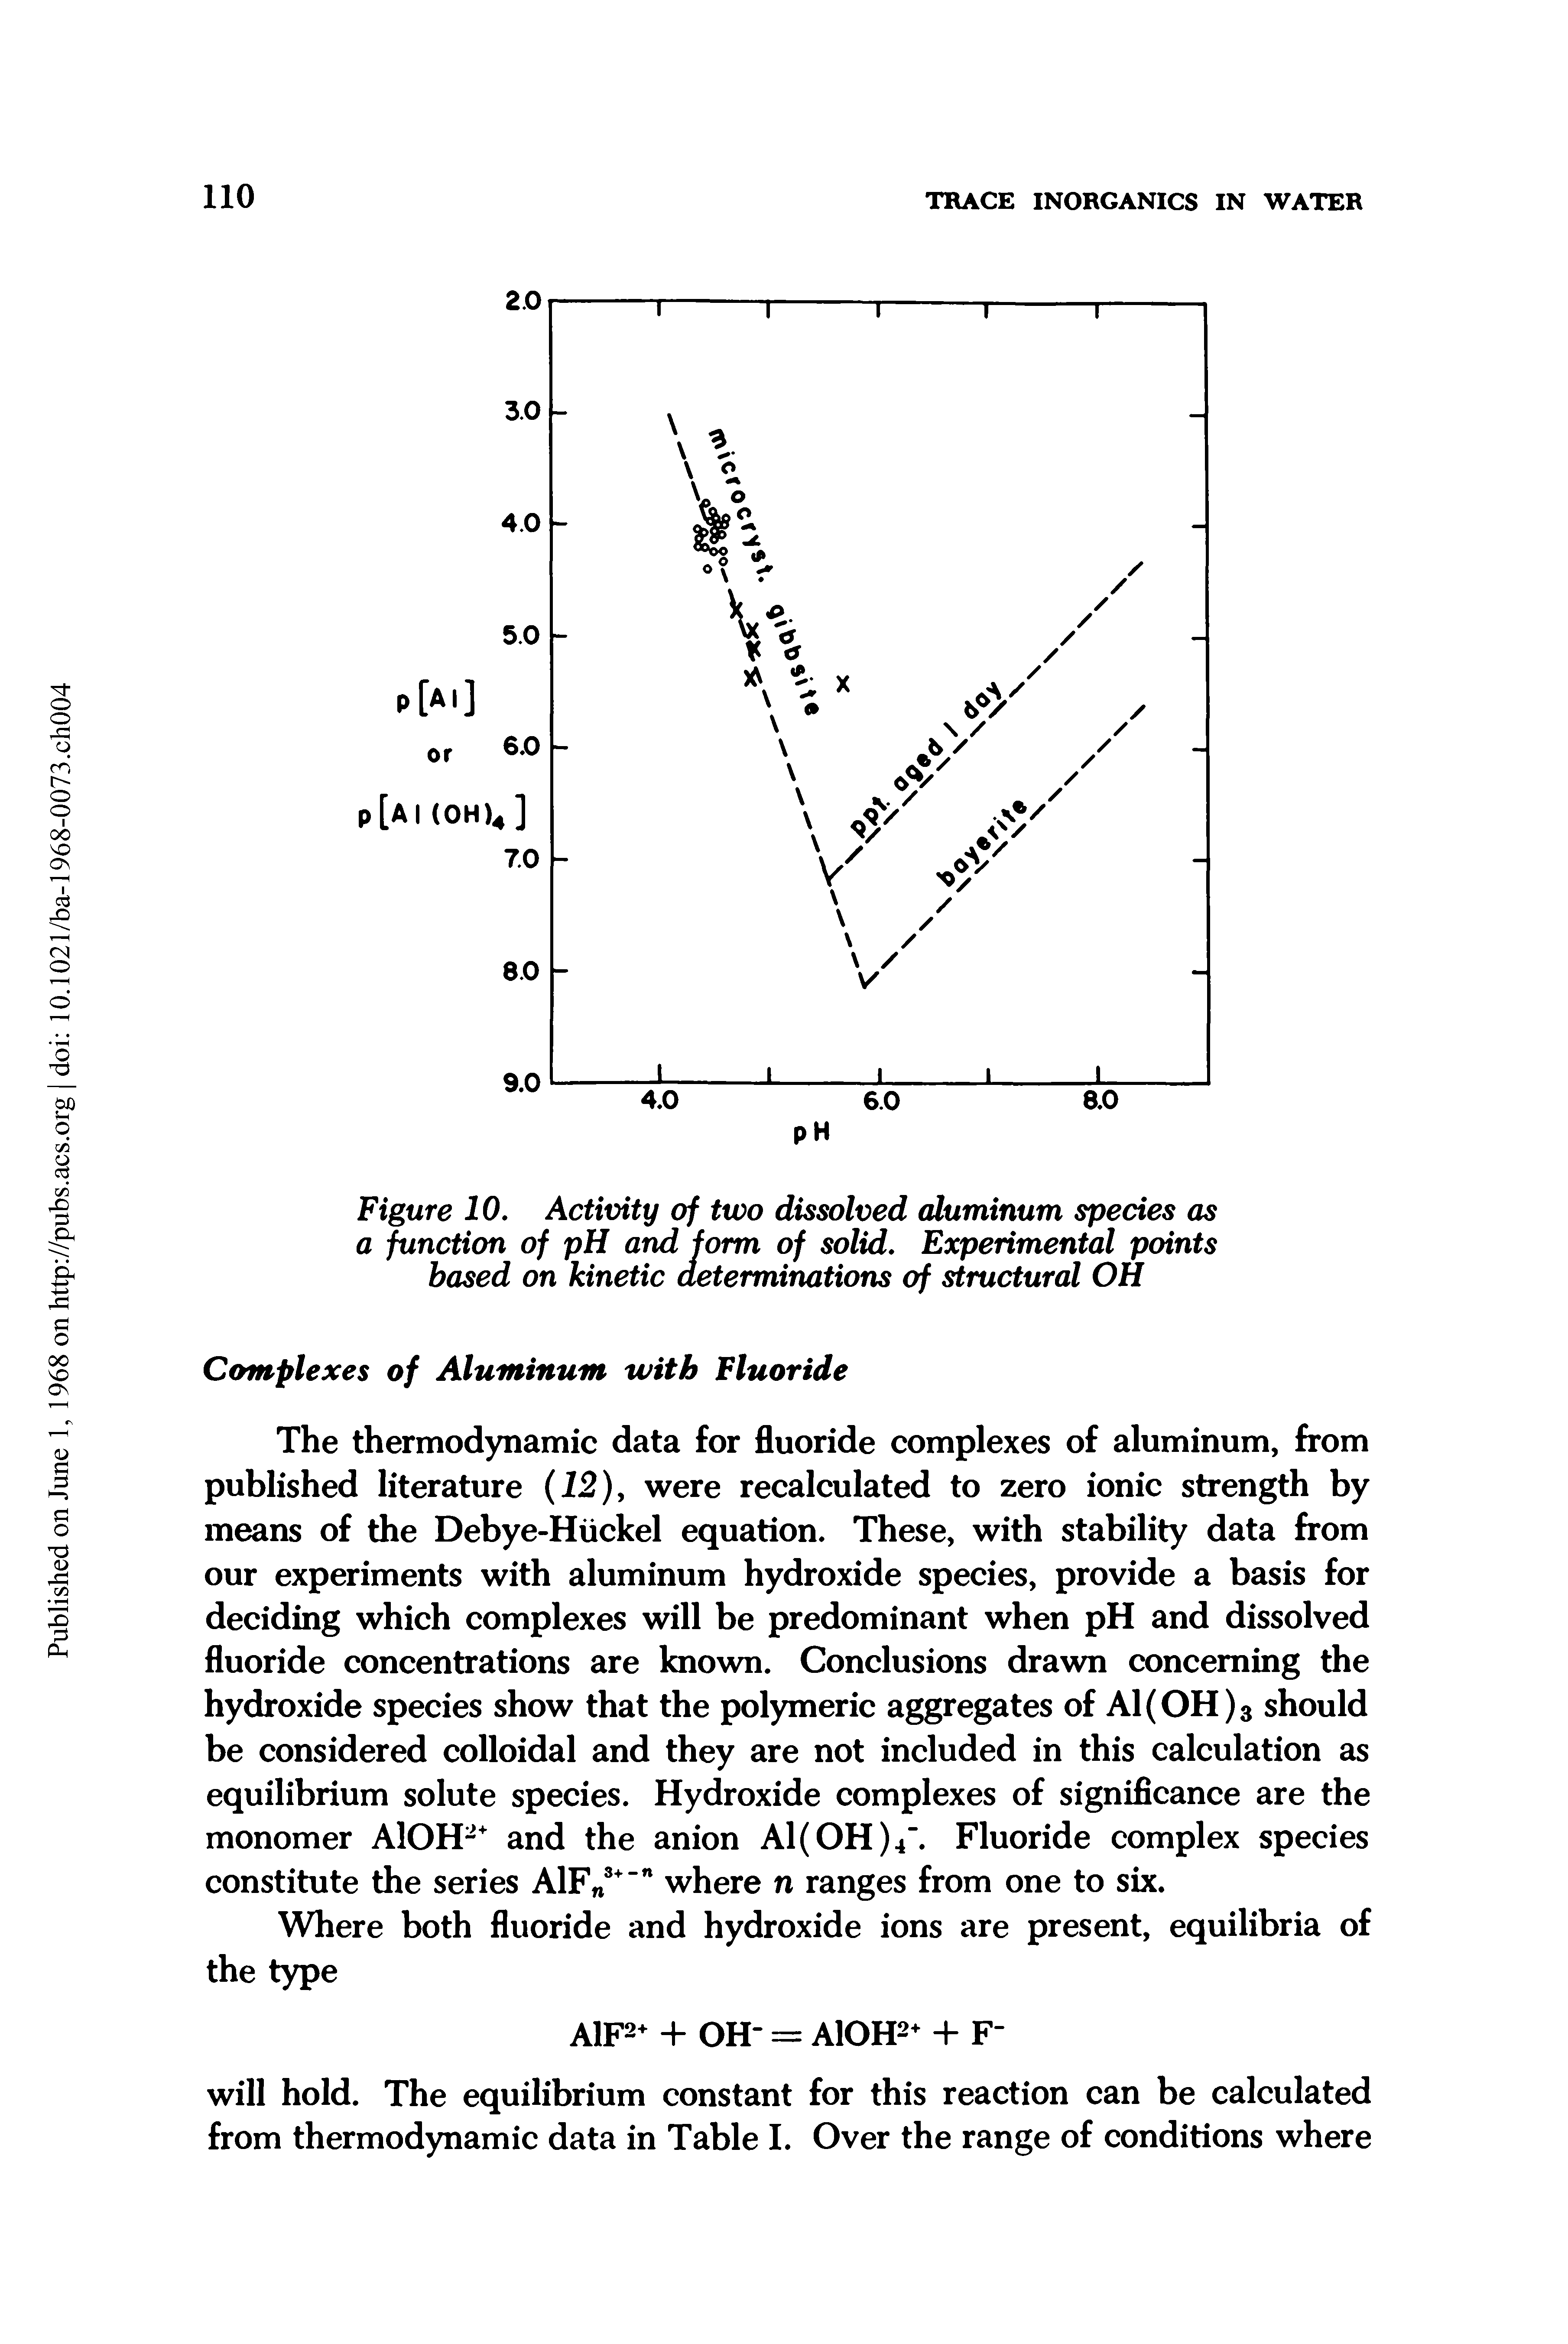 Figure 10, Activity of two dissolved aluminum species as a function of pH and form of solid. Experimental points based on kinetic determinations of structural OH...